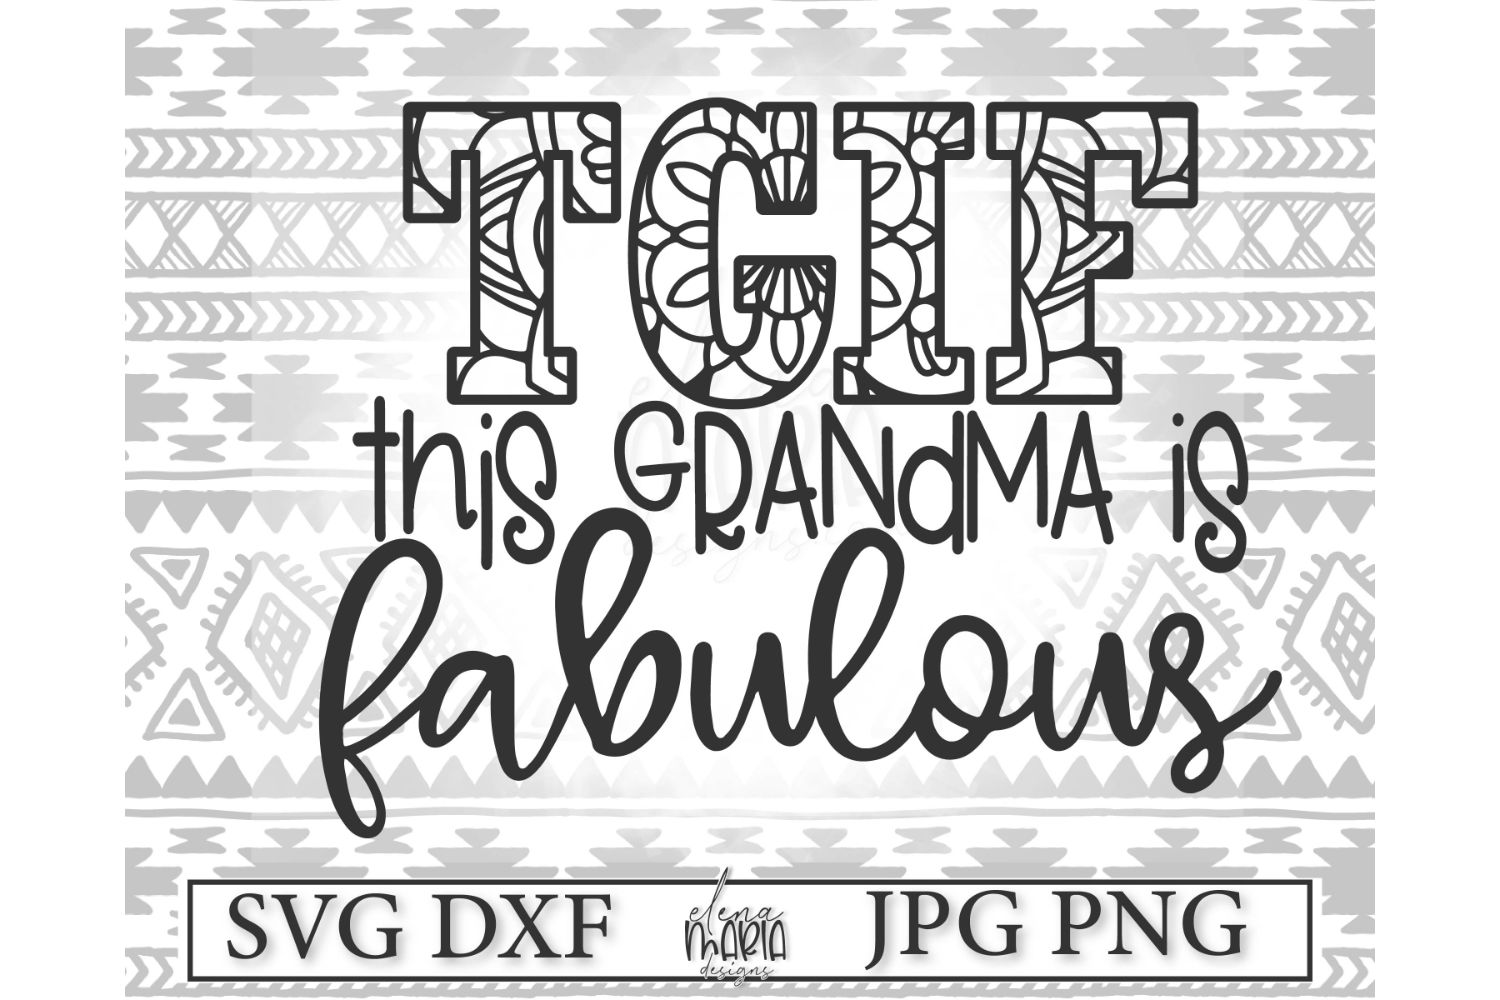 Download Grandma | Mother Svg Files and Cut Files For Crafting ...